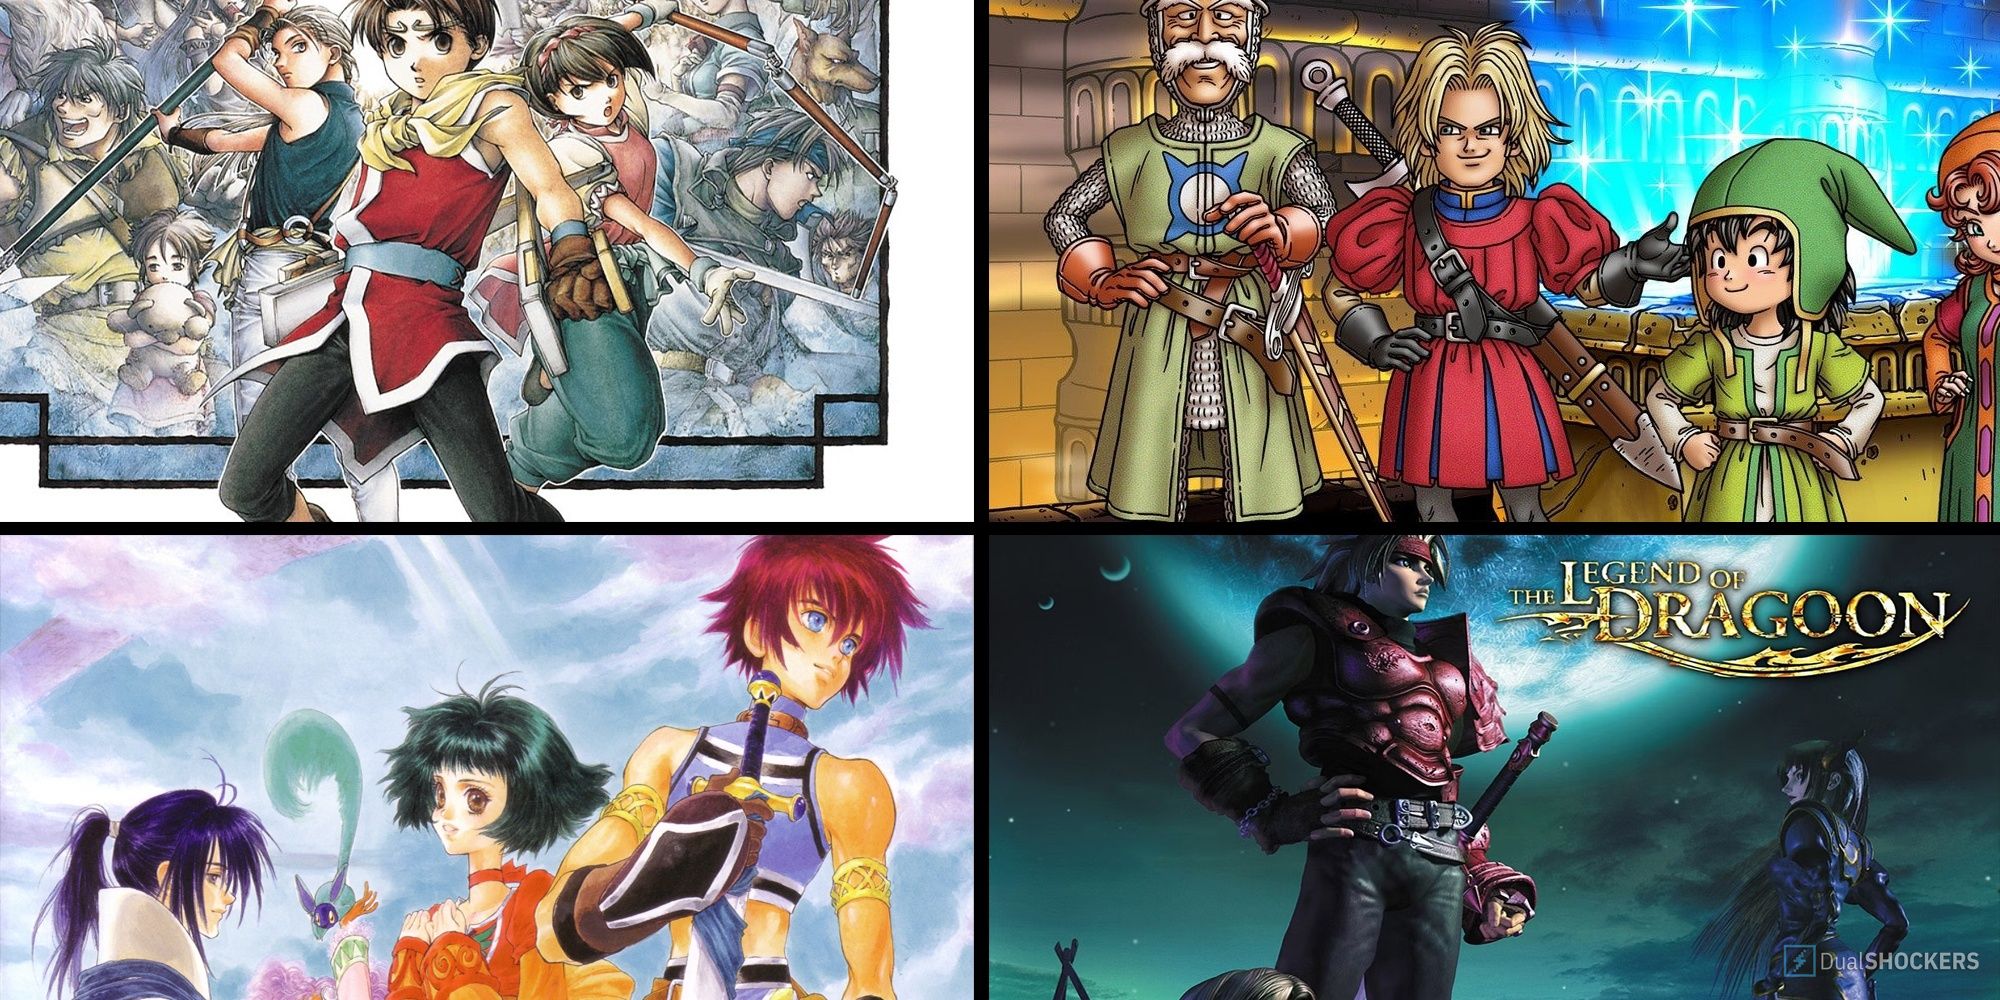 The Main Heroes From Tales Of Eternia, Suikoden II, Dragon Quest VII, And The Legend Of Dragoon Cropped (2)